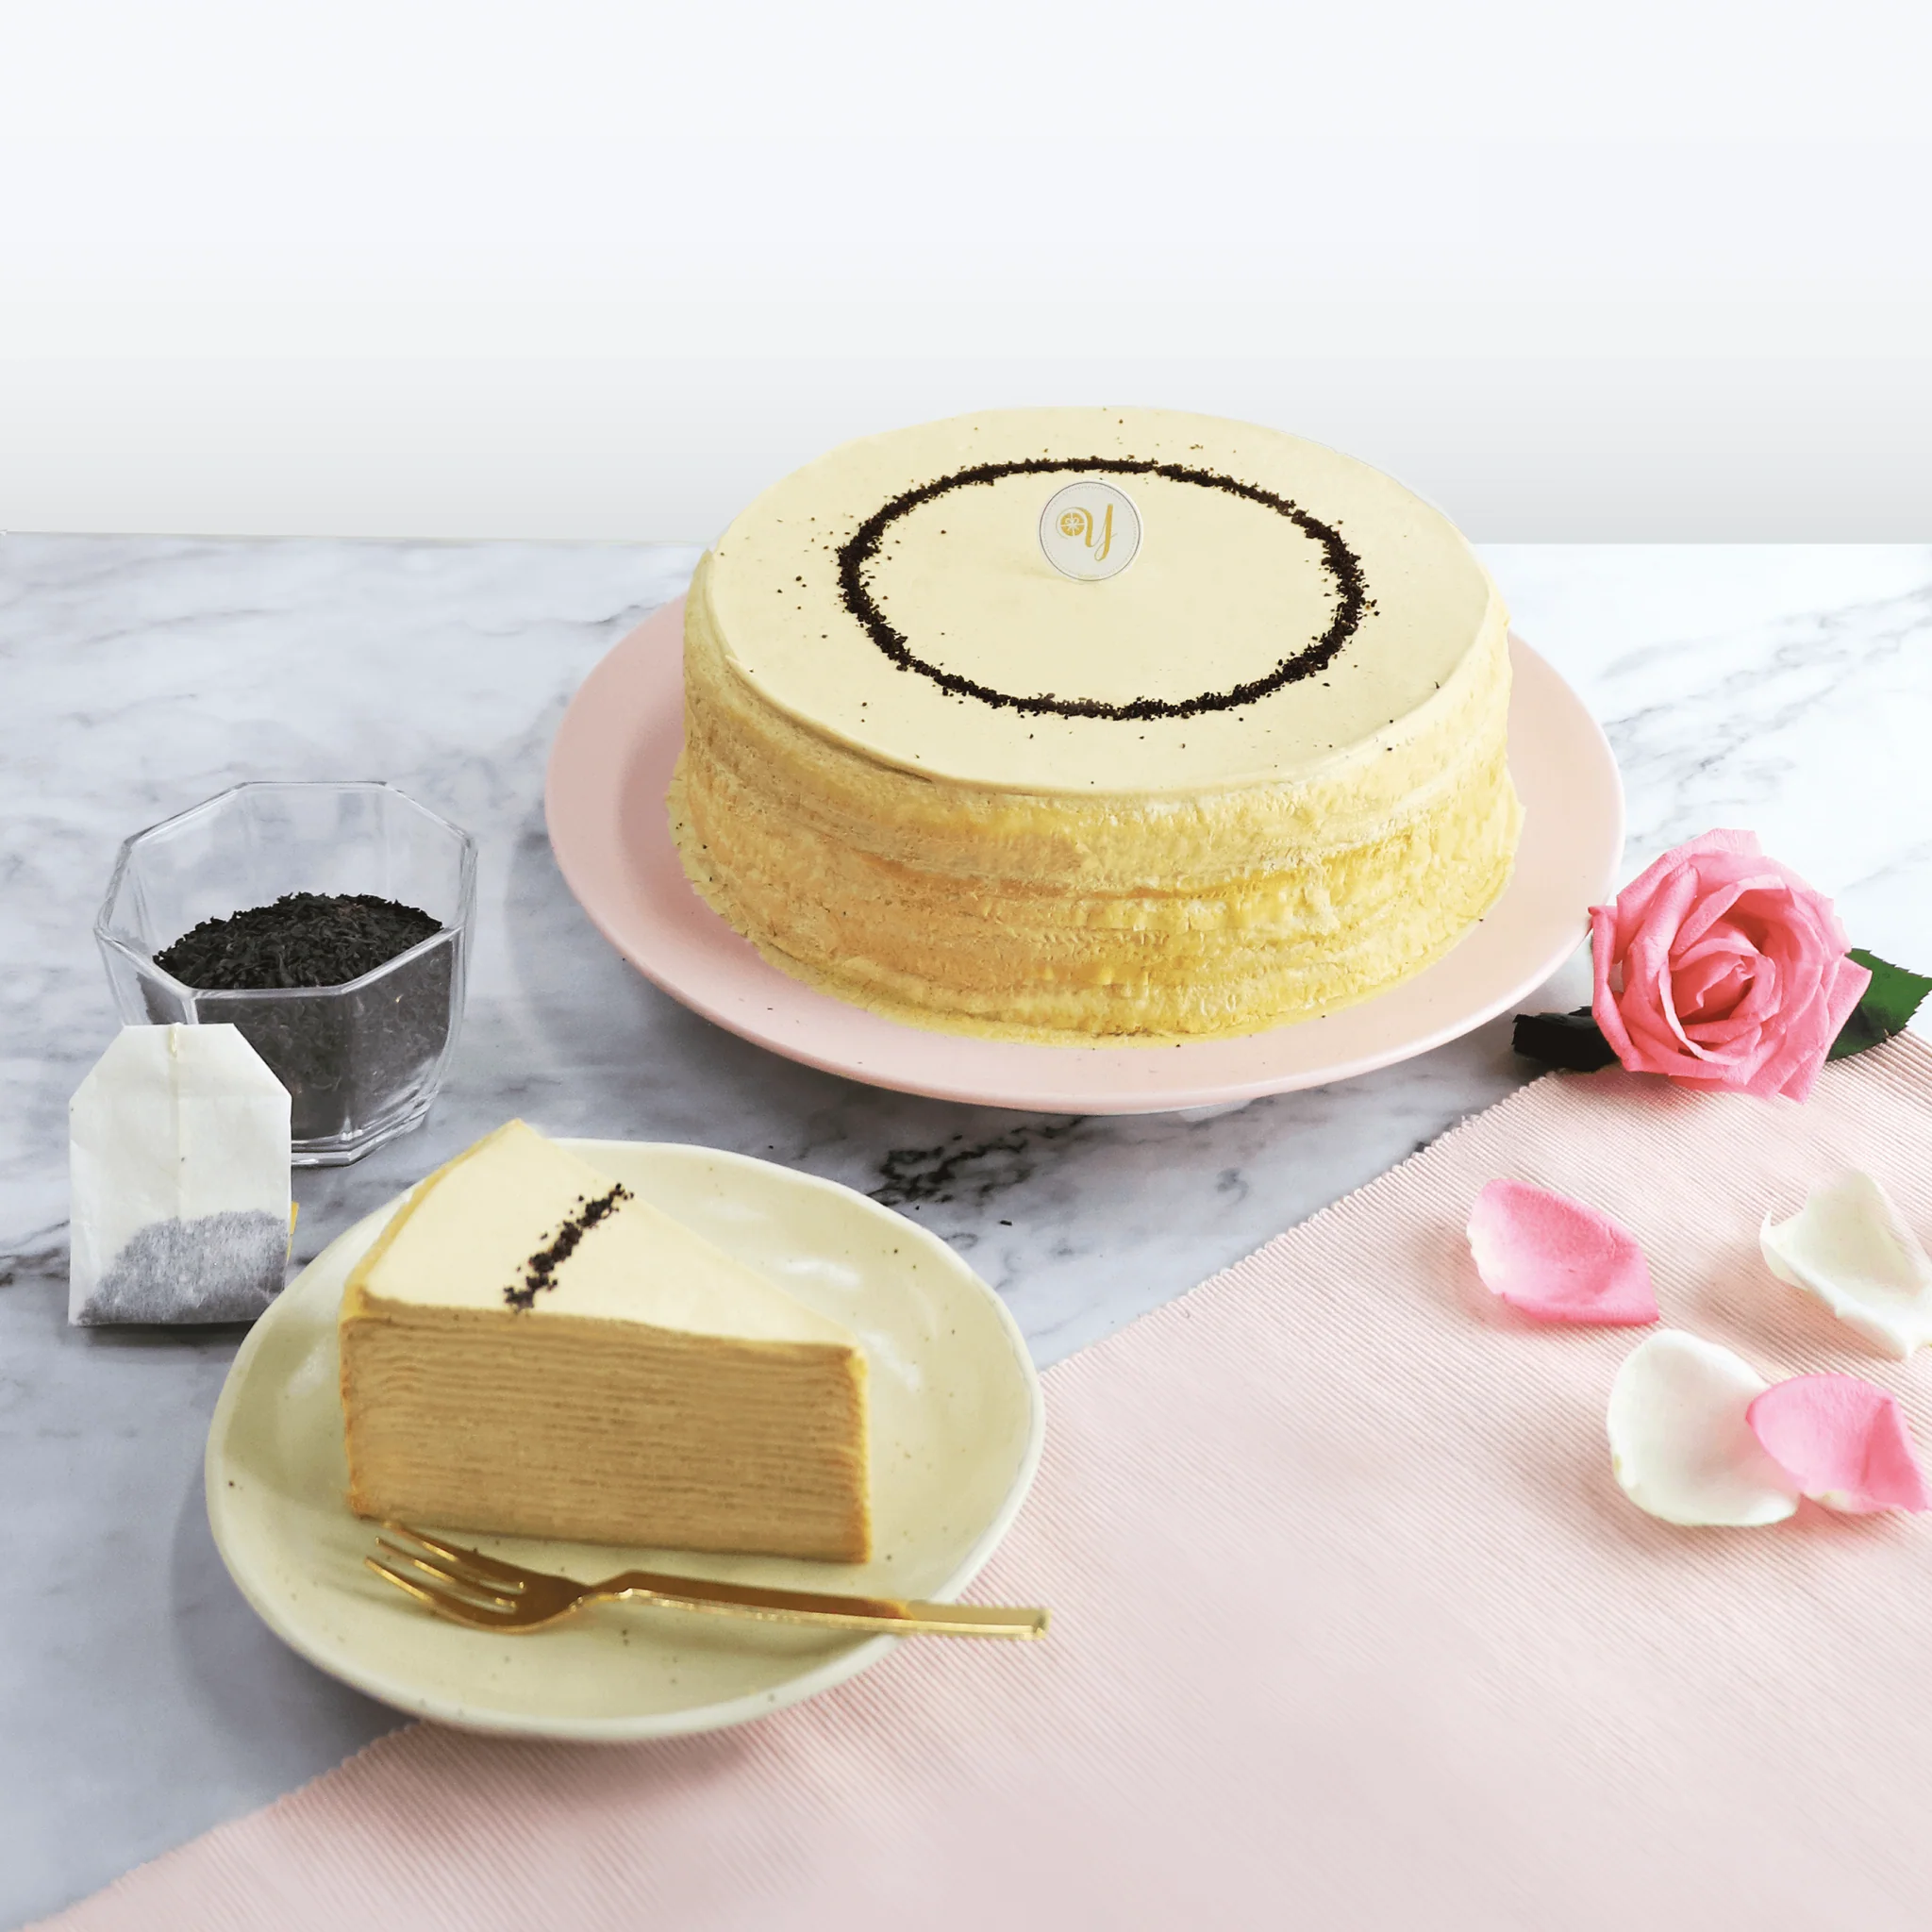 D24 Durian Crepe Cake | Giftr - Malaysia's Leading Online Gift Shop